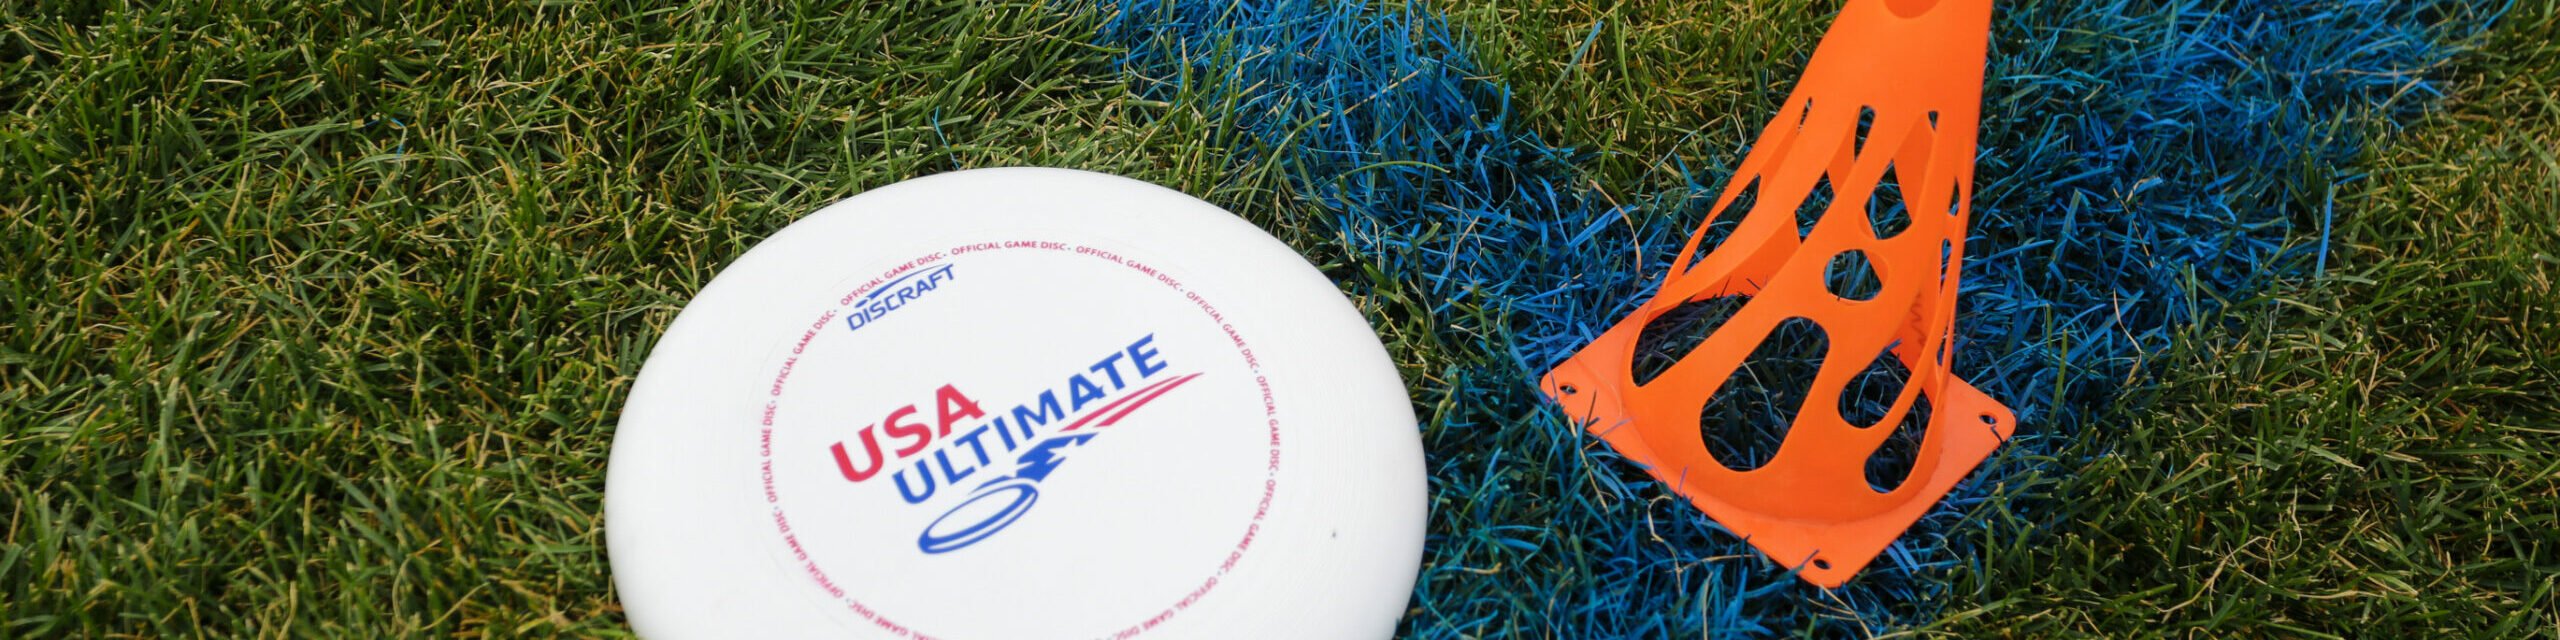 Athlete Safety USA Ultimate pic